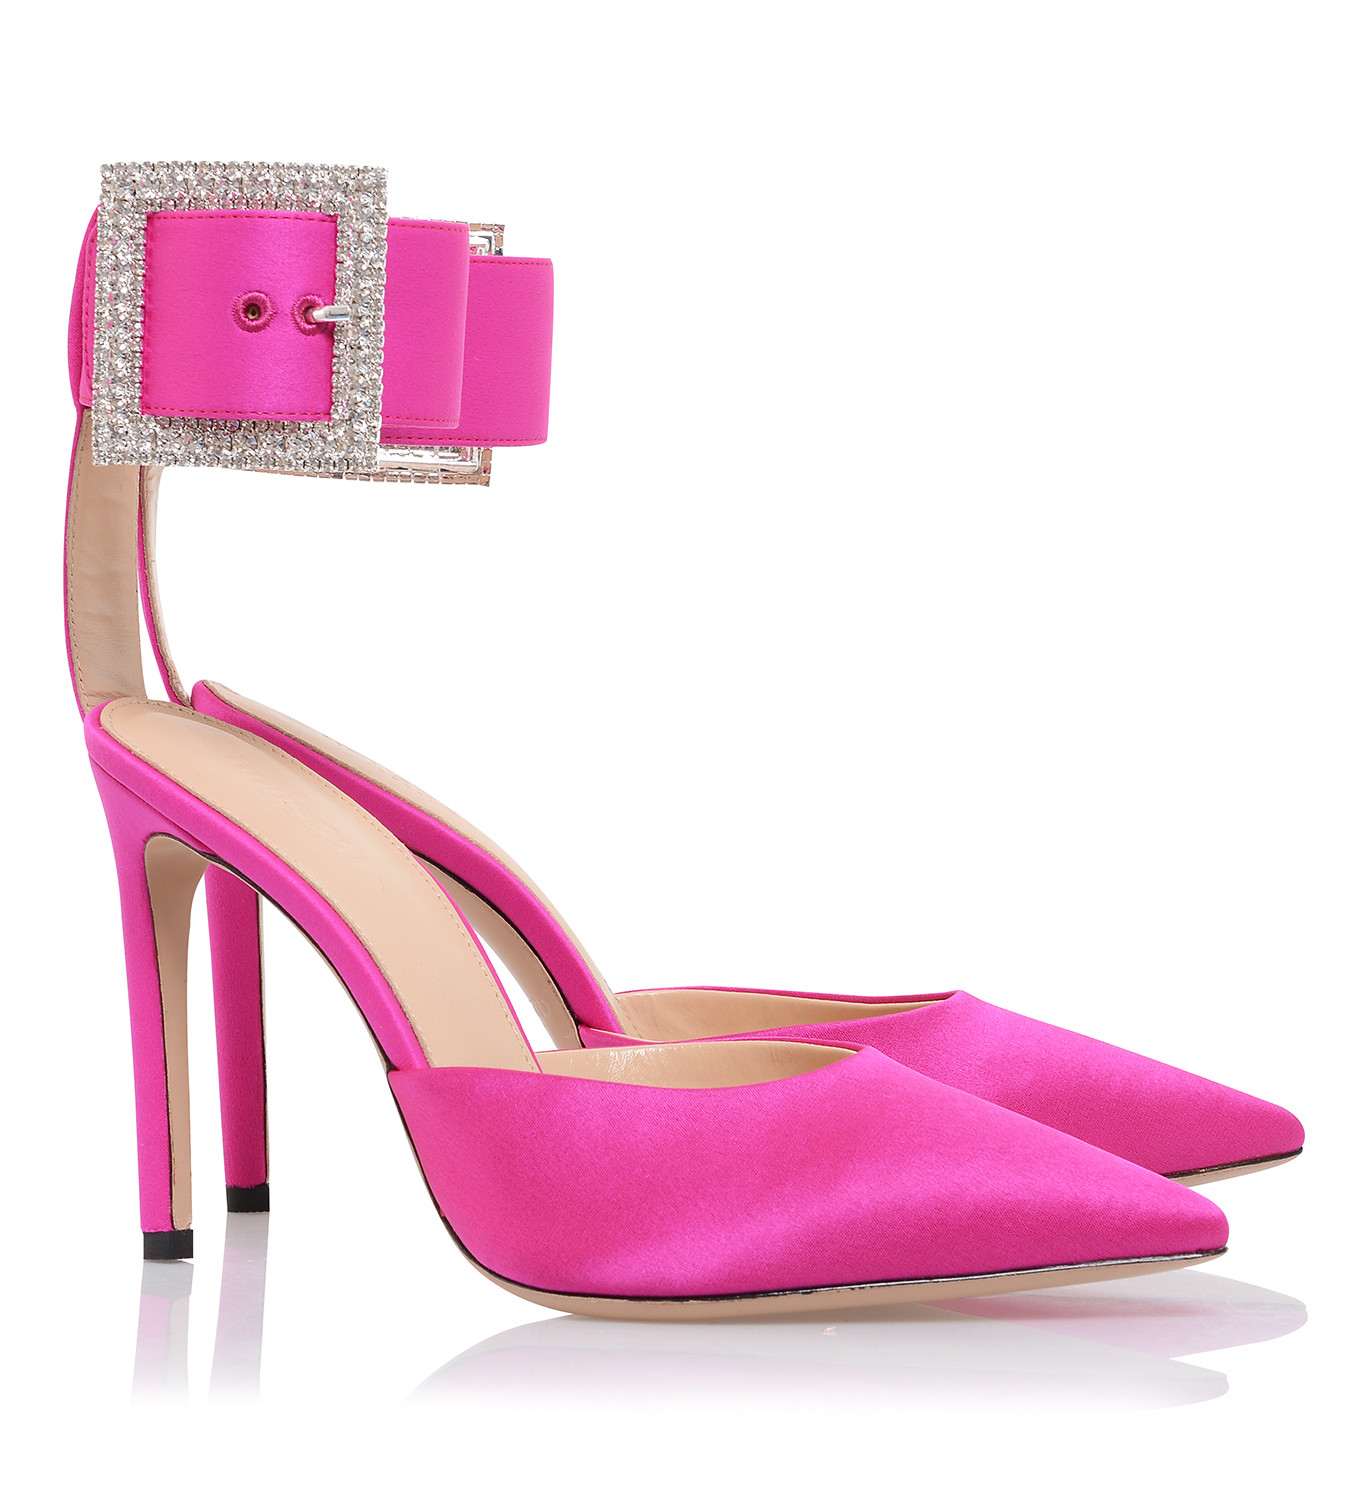 Shoes : 'Krista' Pink Crystal Buckle Pumps